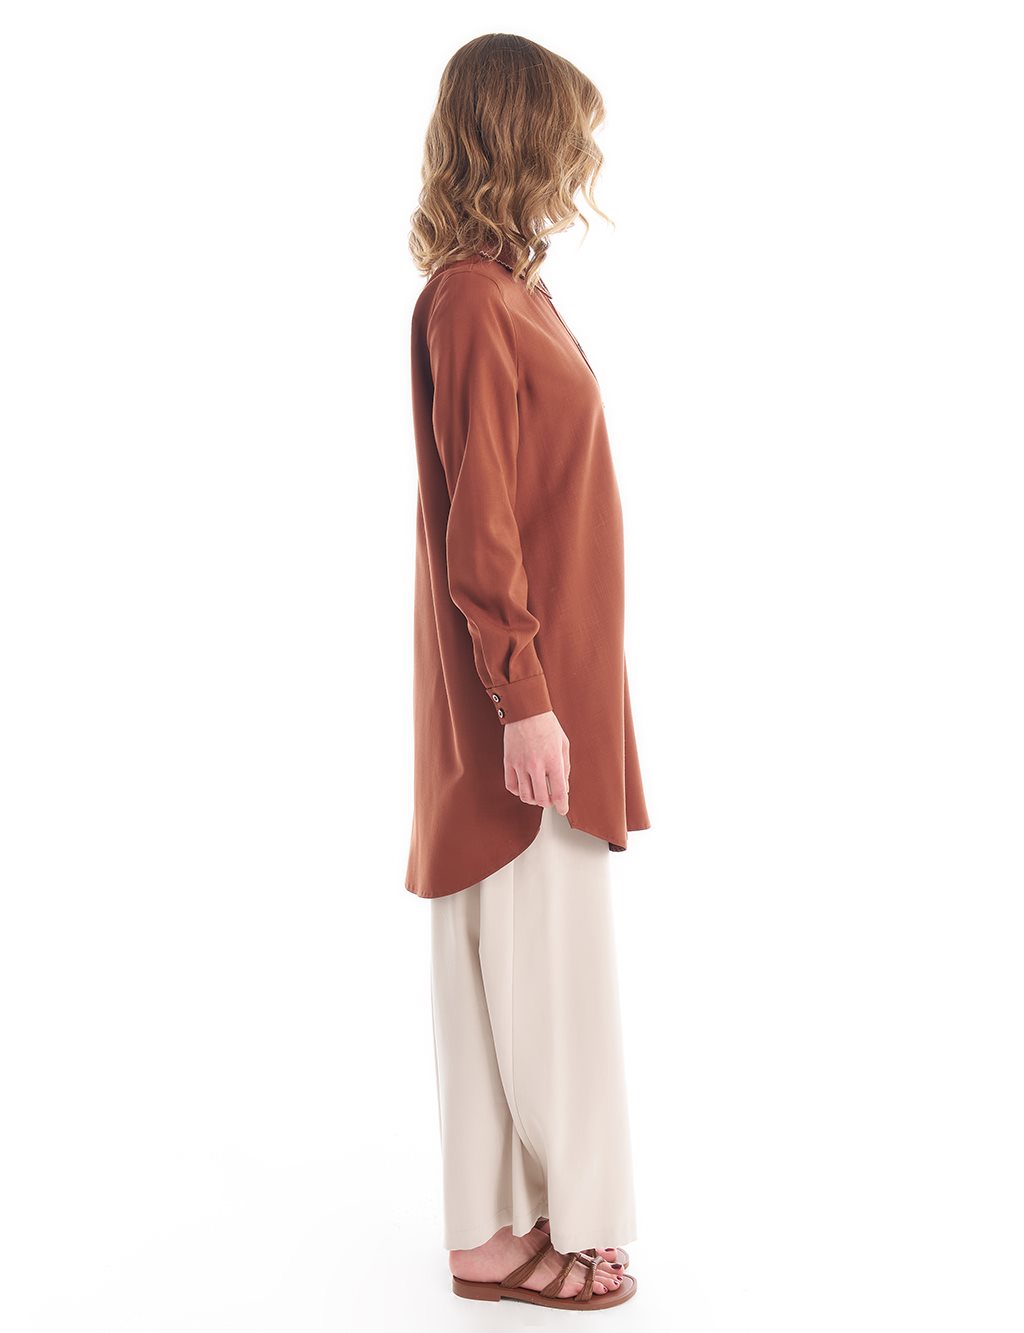 Shirt Collar Tunic with Knit Stitching in Brown